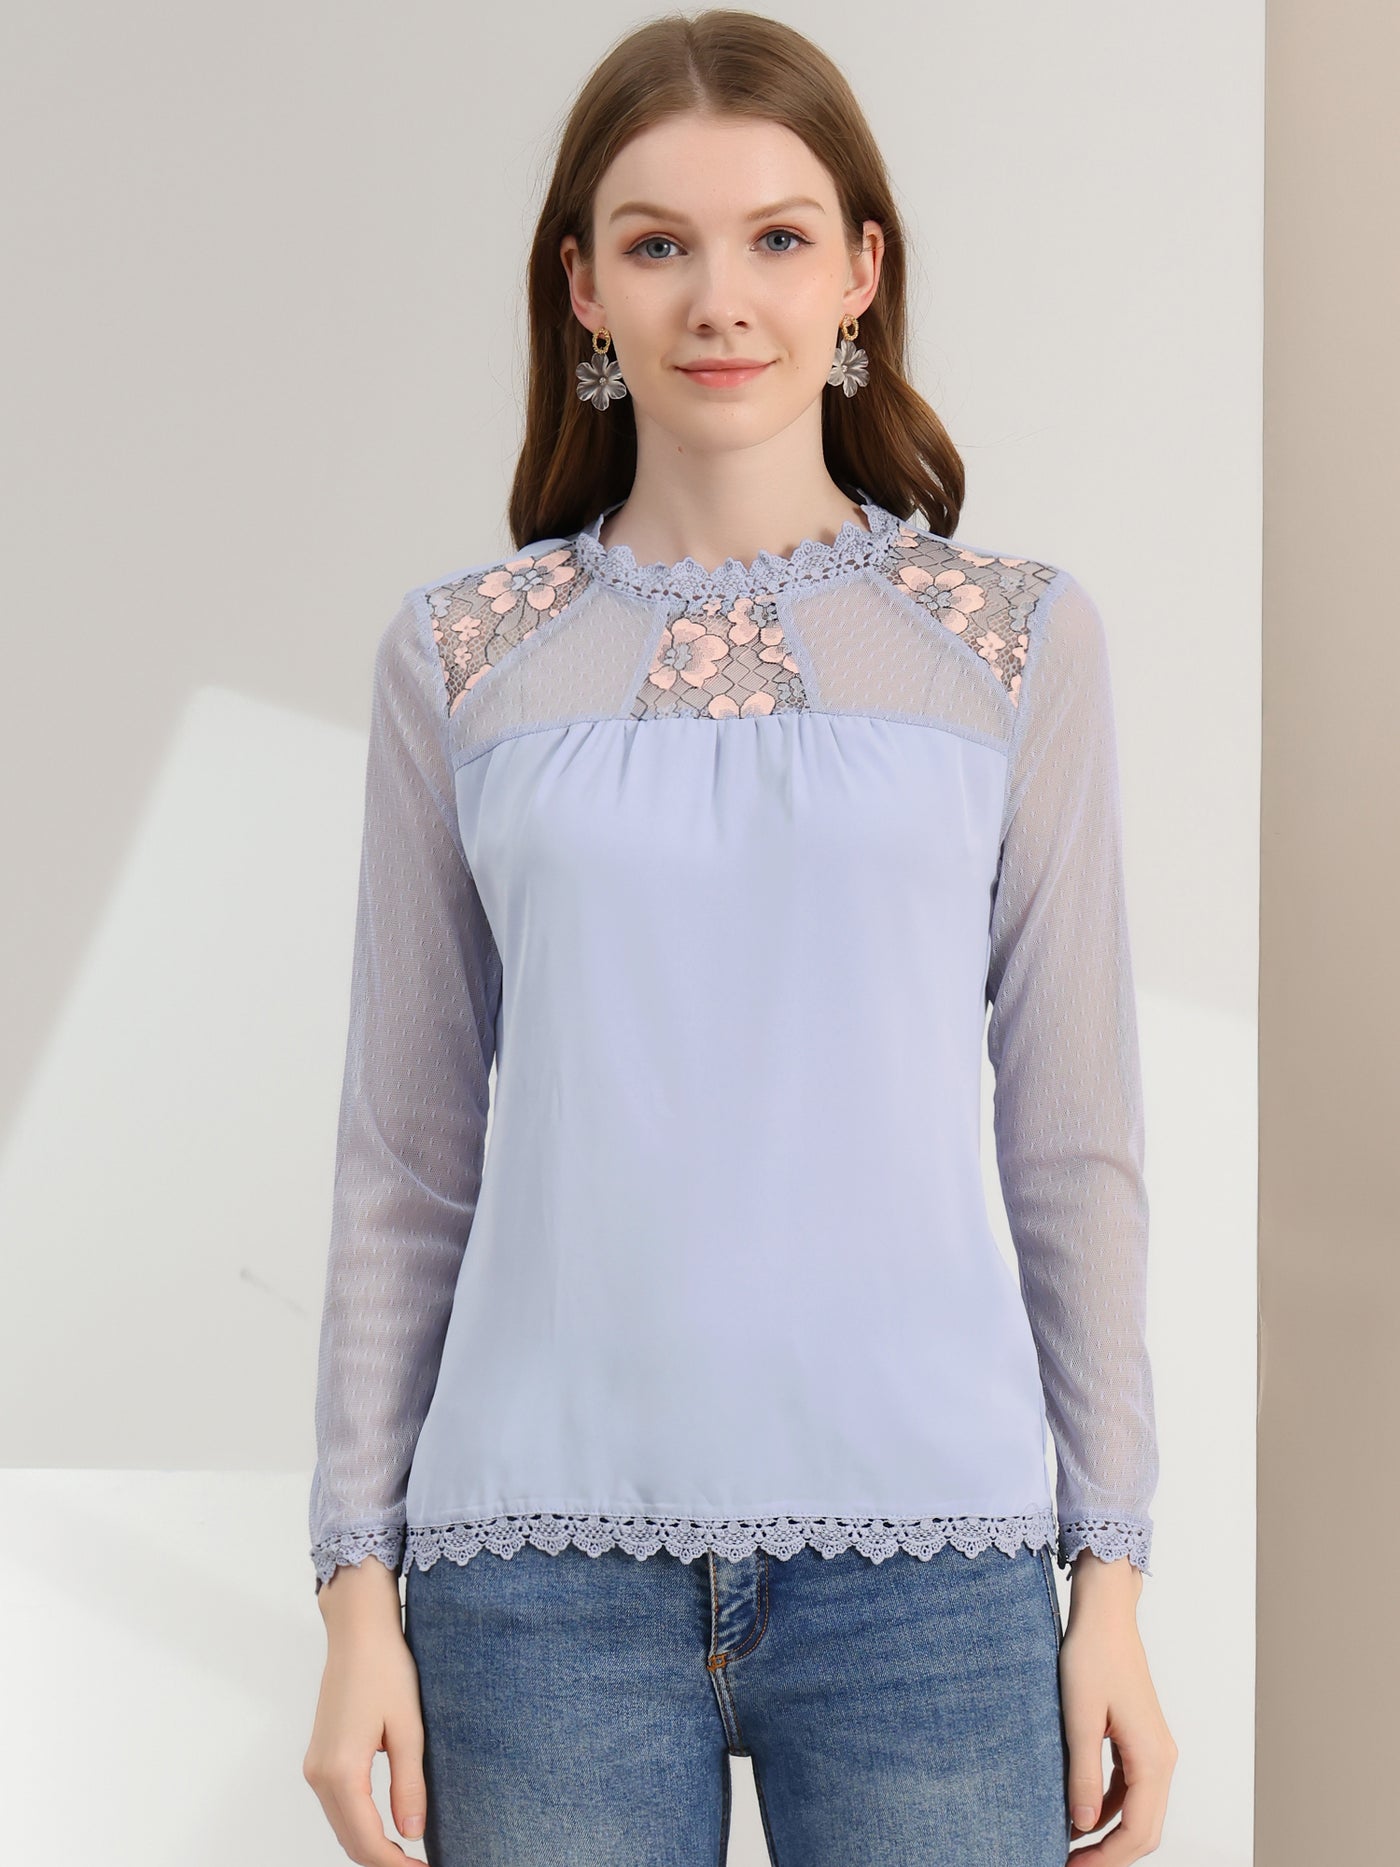 Allegra K Lace Mesh Long Sleeve Top Round Neck Casual Elegant Blouse